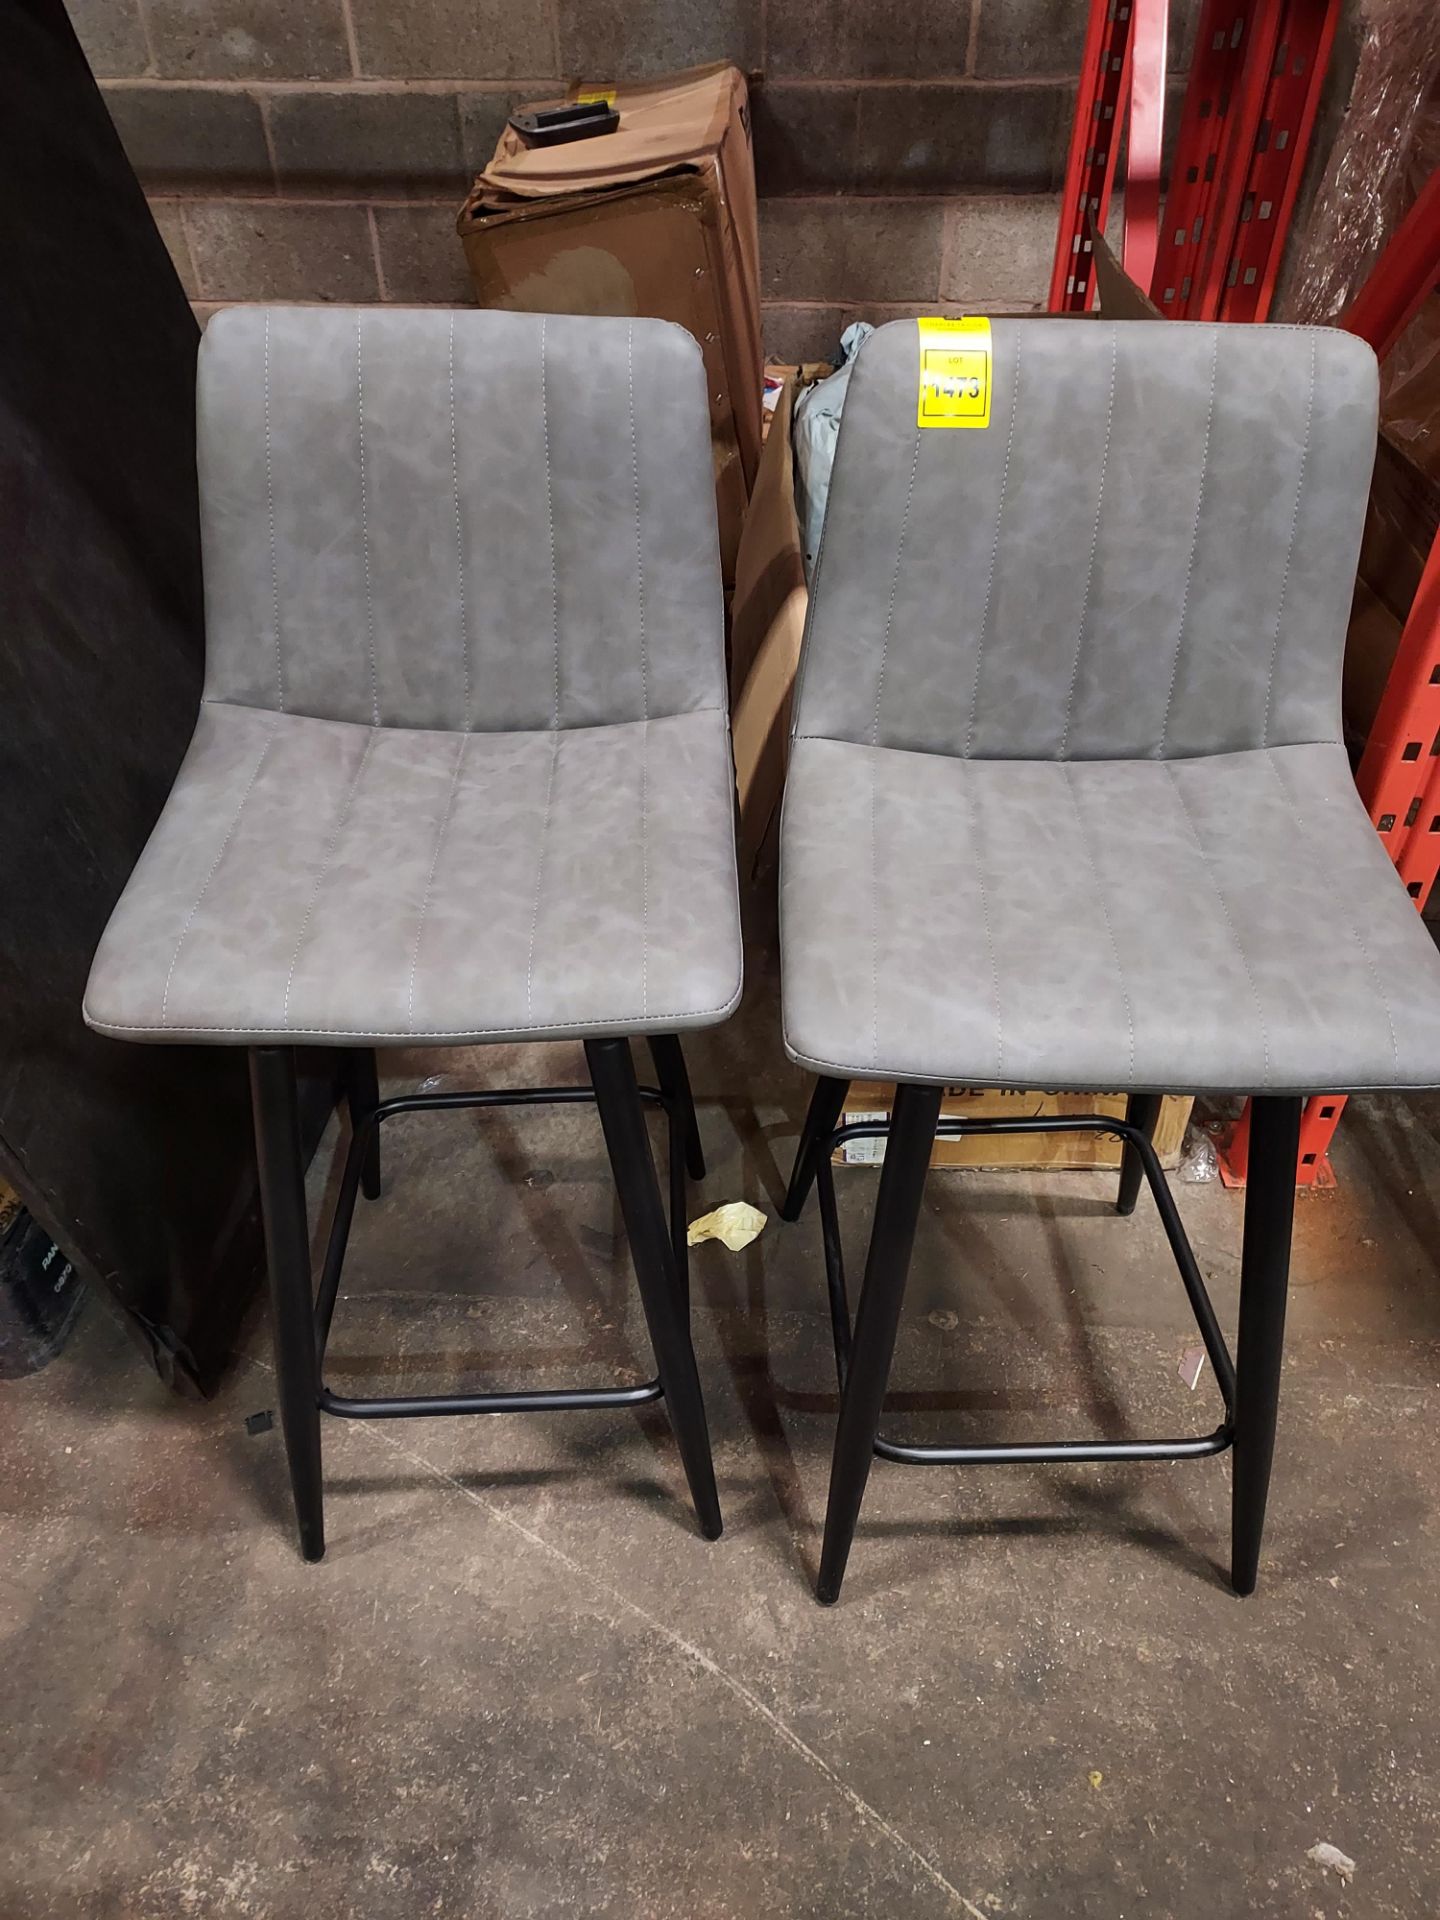 2 X BRAND NEW ENJOY THE GOOD LIFE LOW BAR STOOLS IN VELVET LOOK GREY - PRE MADE